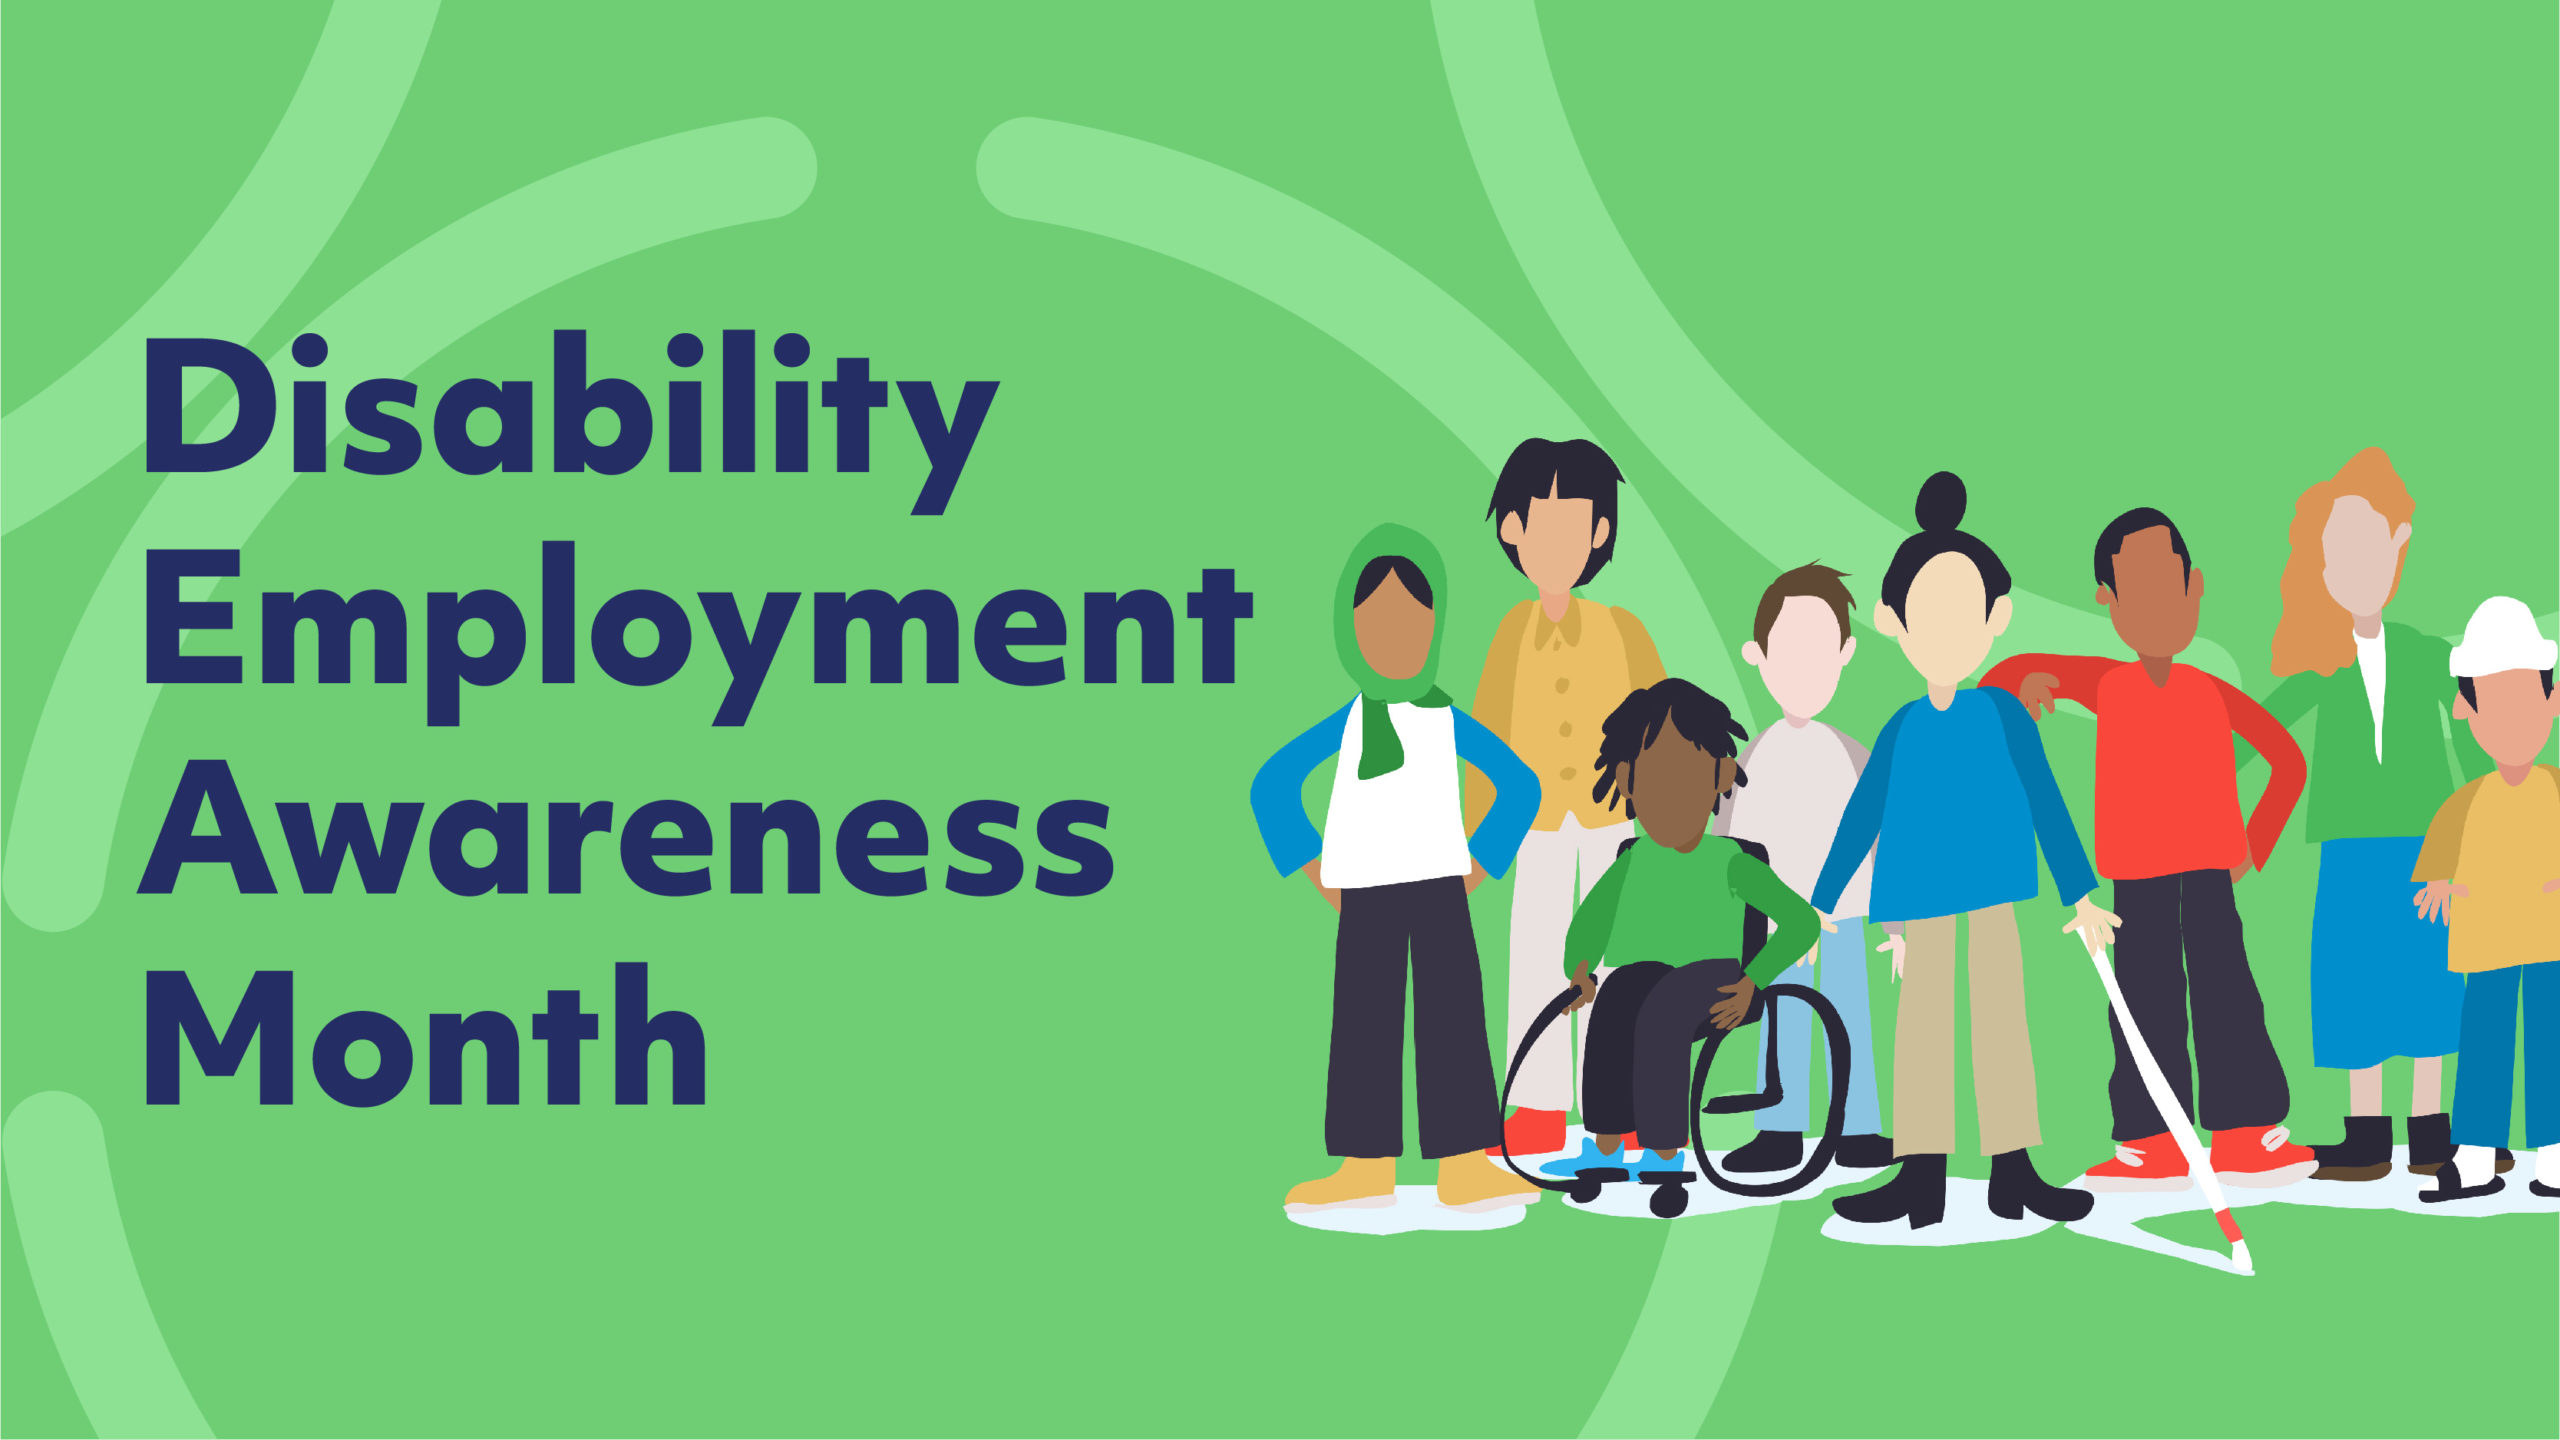 Disability:IN Celebrates Disability Employment Awareness Month with Events Featuring Singer Mandy Harvey, Fortune 500 CEOs, Entrepreneurs with Disabilities and More